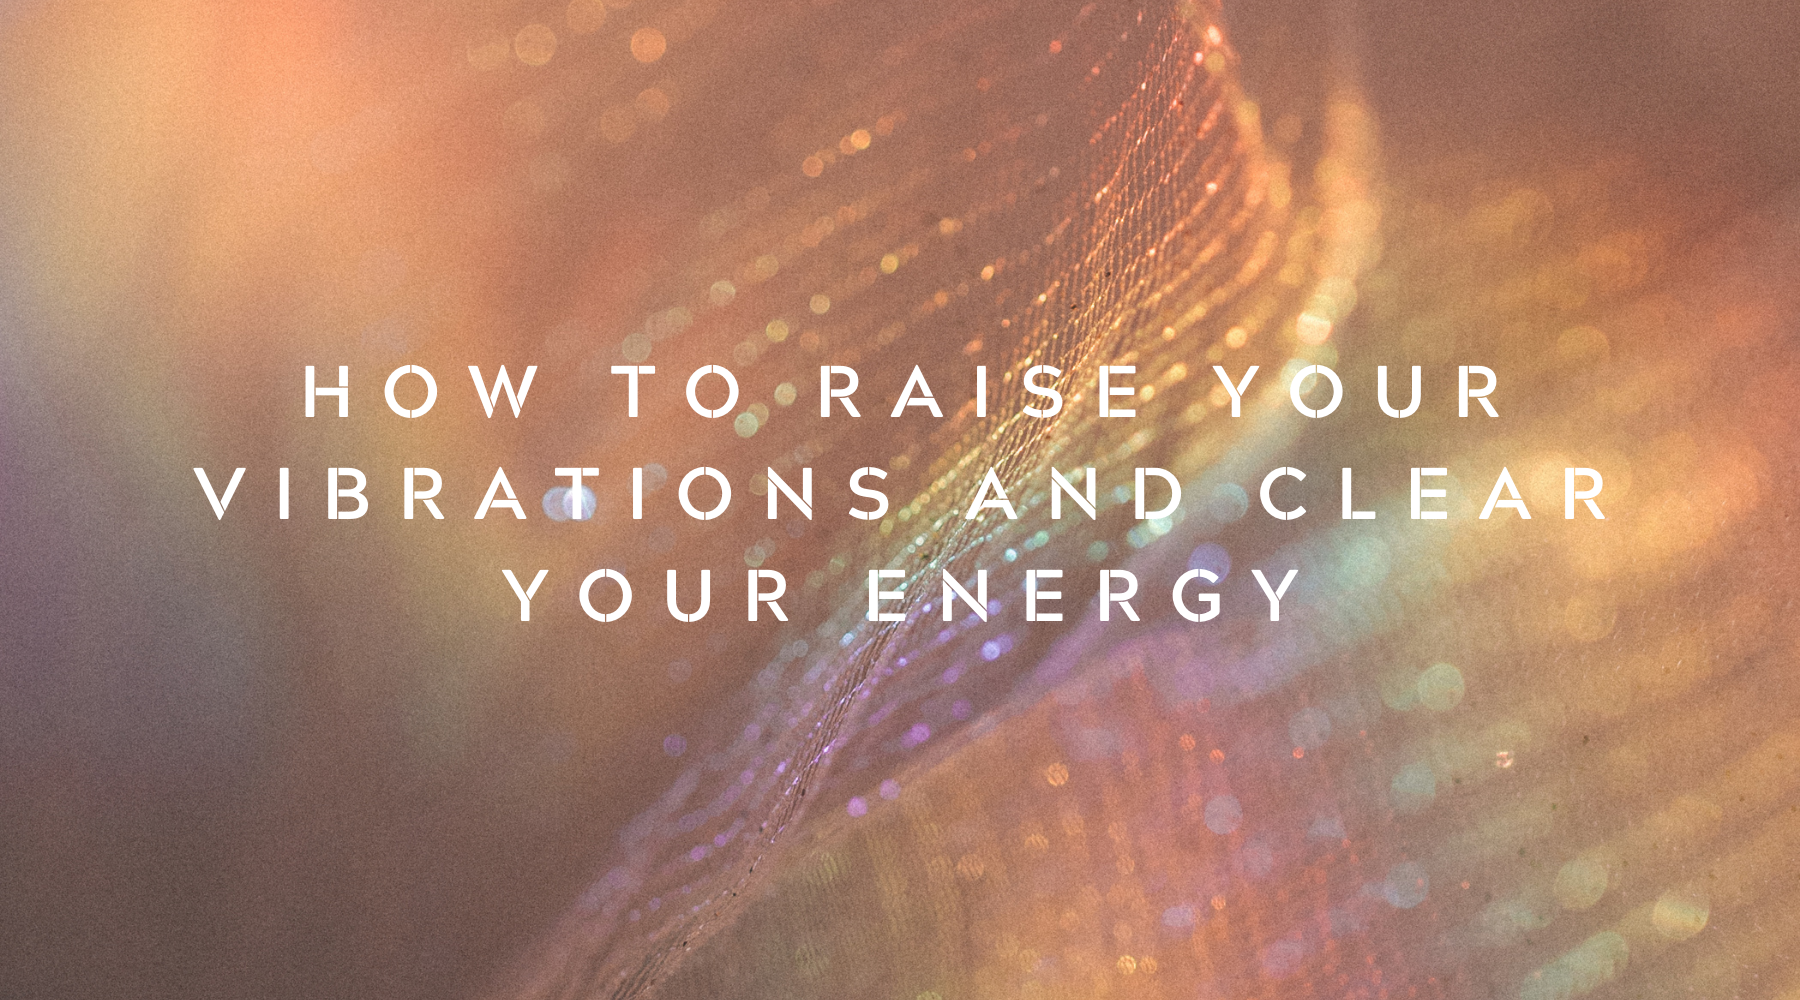 How to Raise Your Vibrations and Clear Your Energy